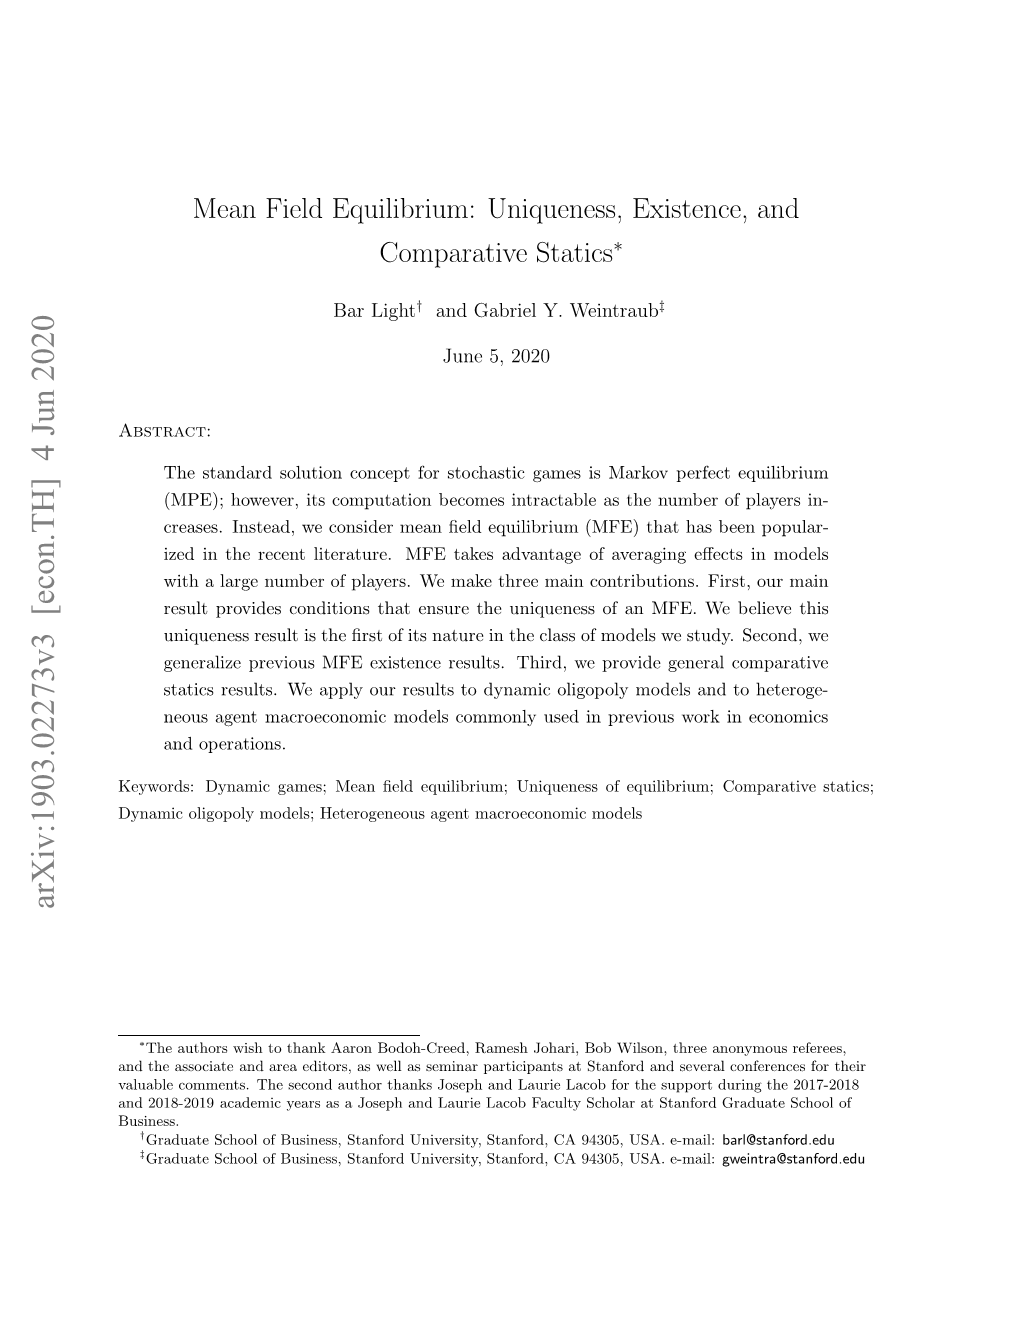 Mean Field Equilibrium: Uniqueness, Existence, and Comparative Statics